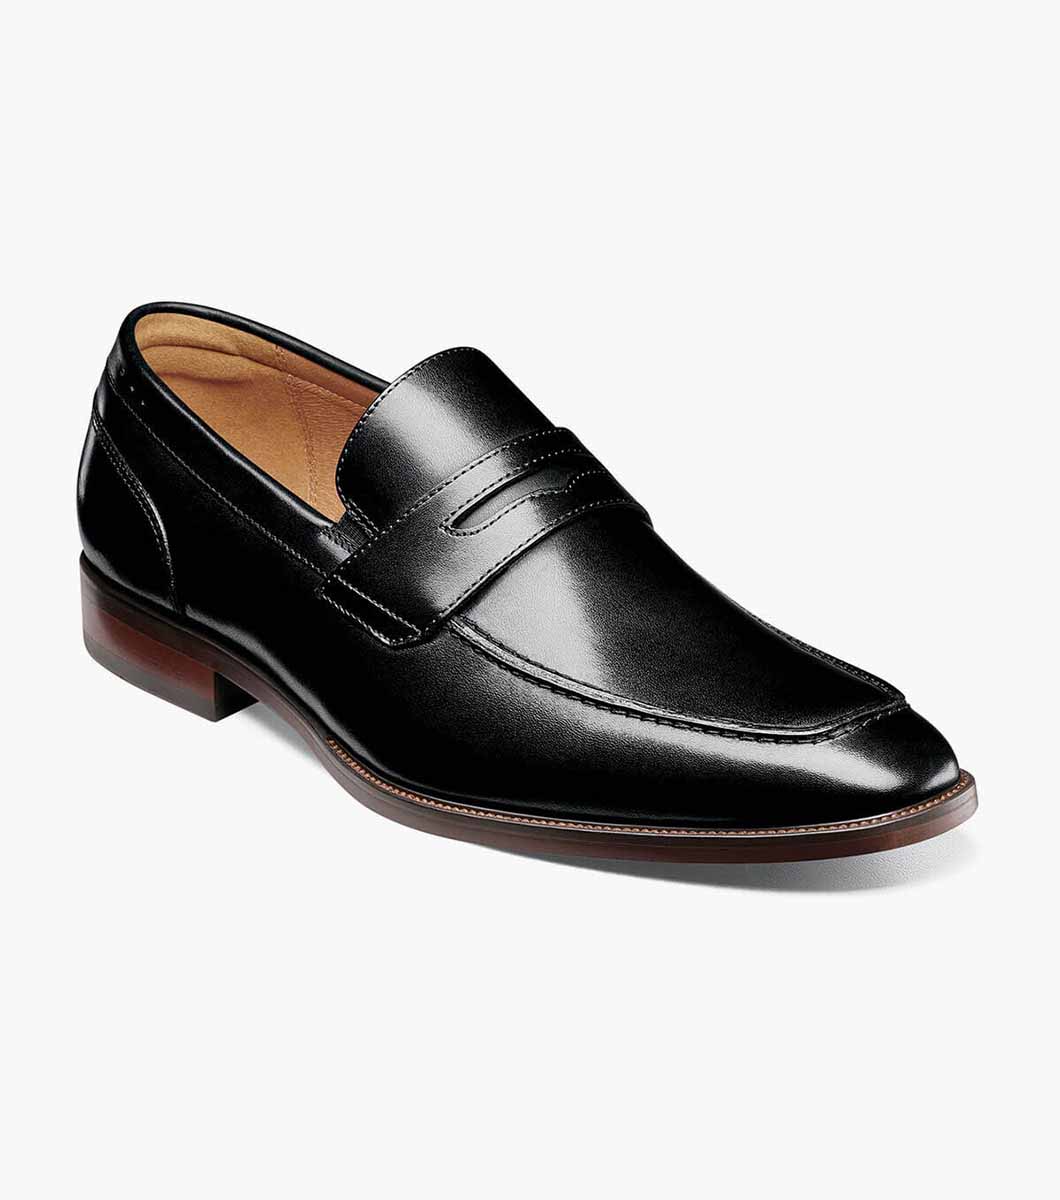 Sorrento by Florsheim Shoes